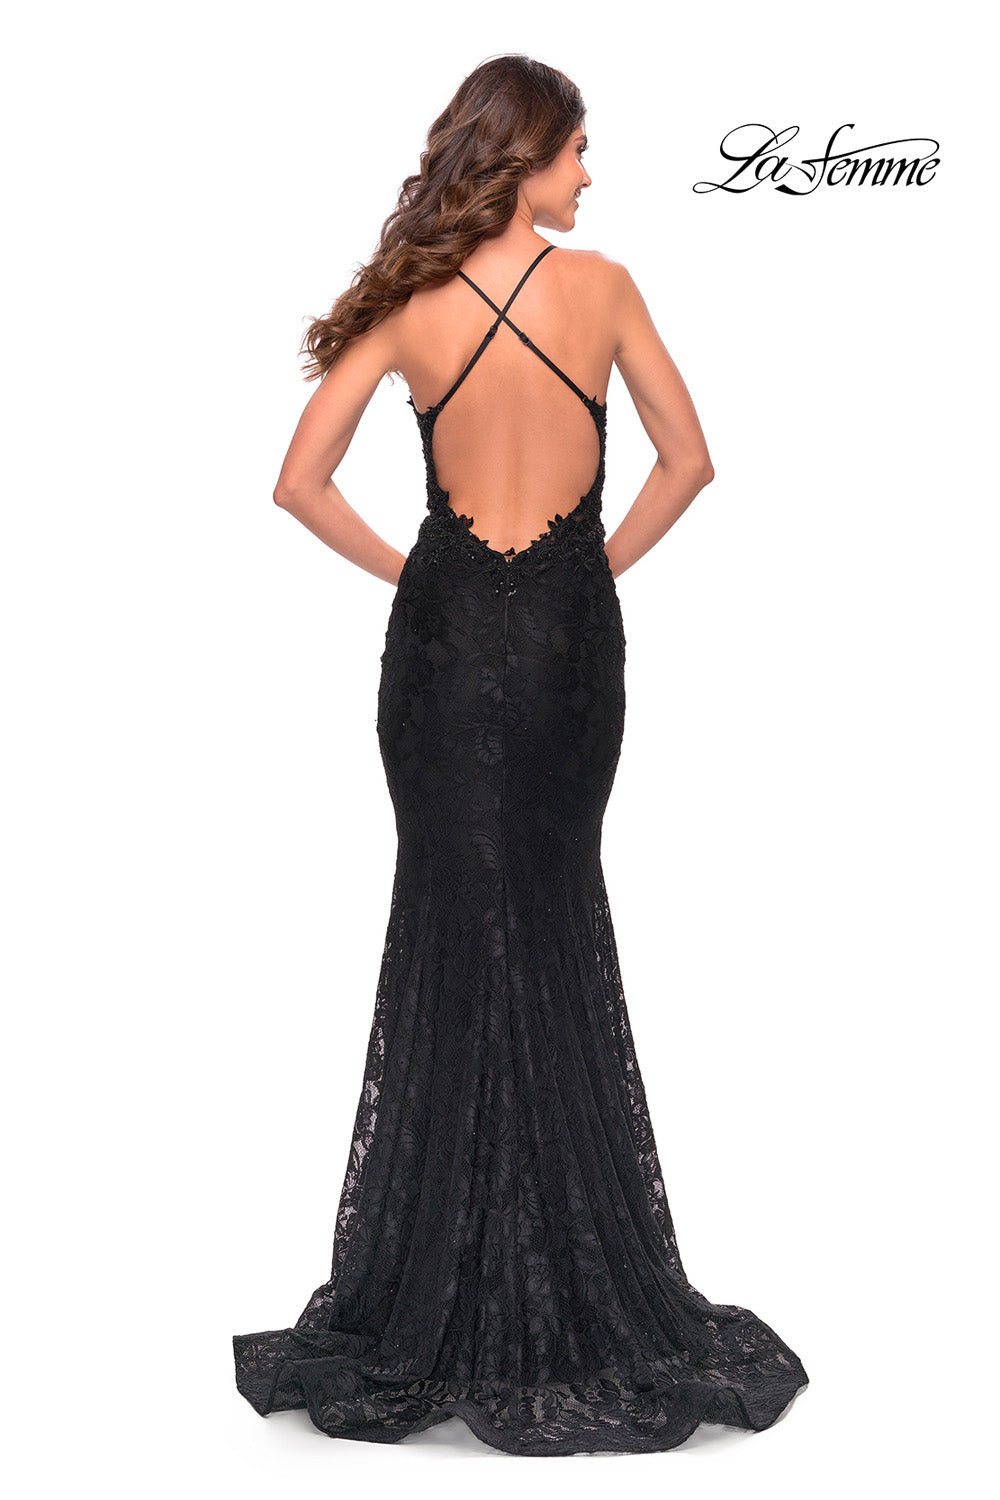 La Femme 31265 prom dress images.  La Femme 31265 is available in these colors: Black, Dark Berry, Dark Emerald.